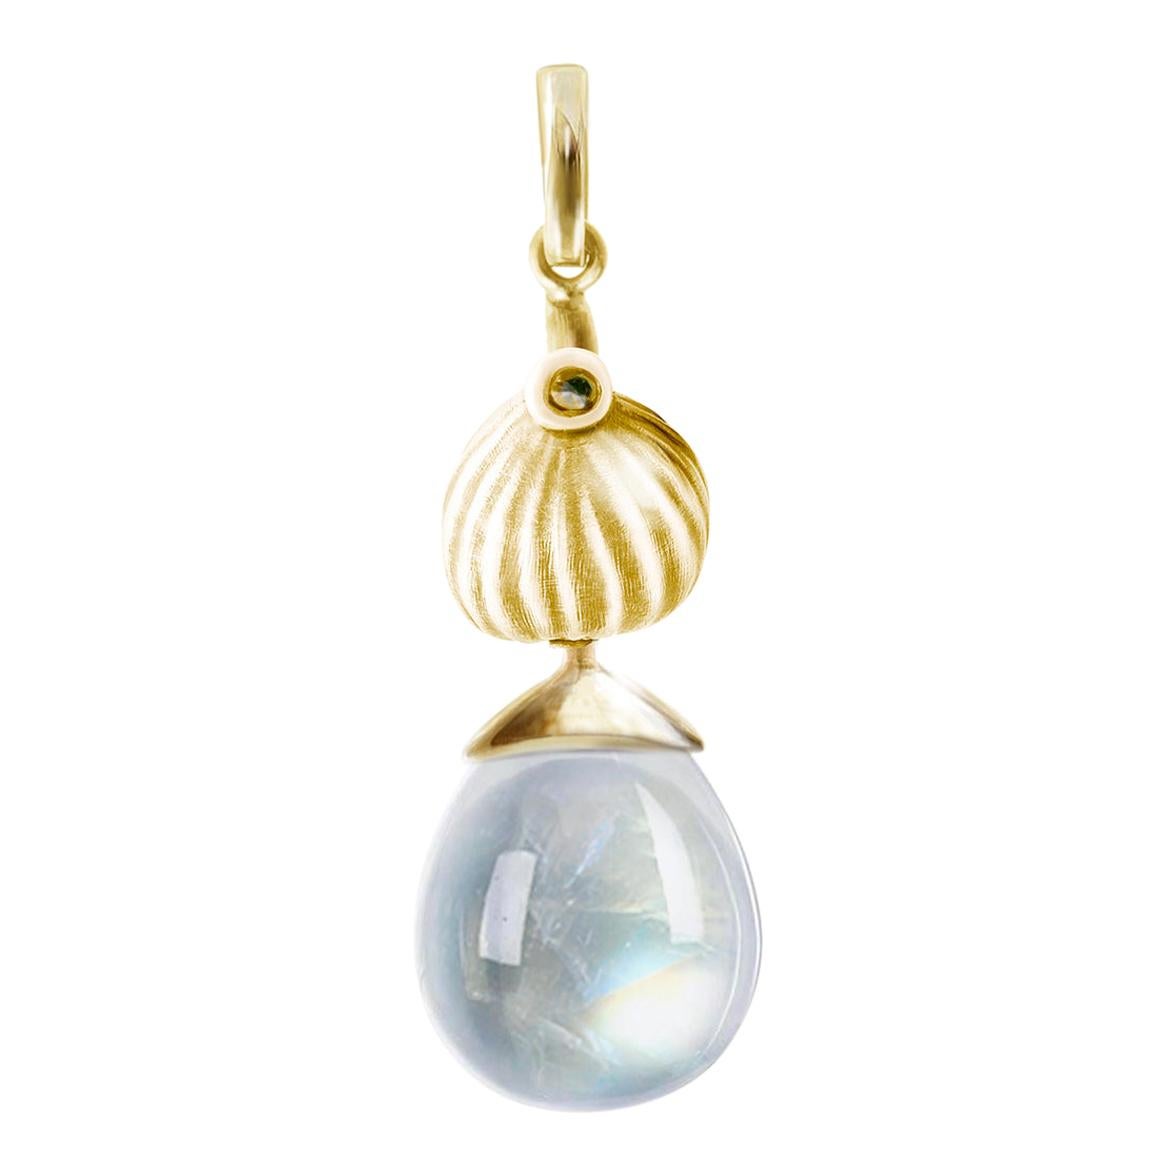 Eighteen Karat Yellow Gold Drop Pendant Necklace with Moonstone by the Artist For Sale